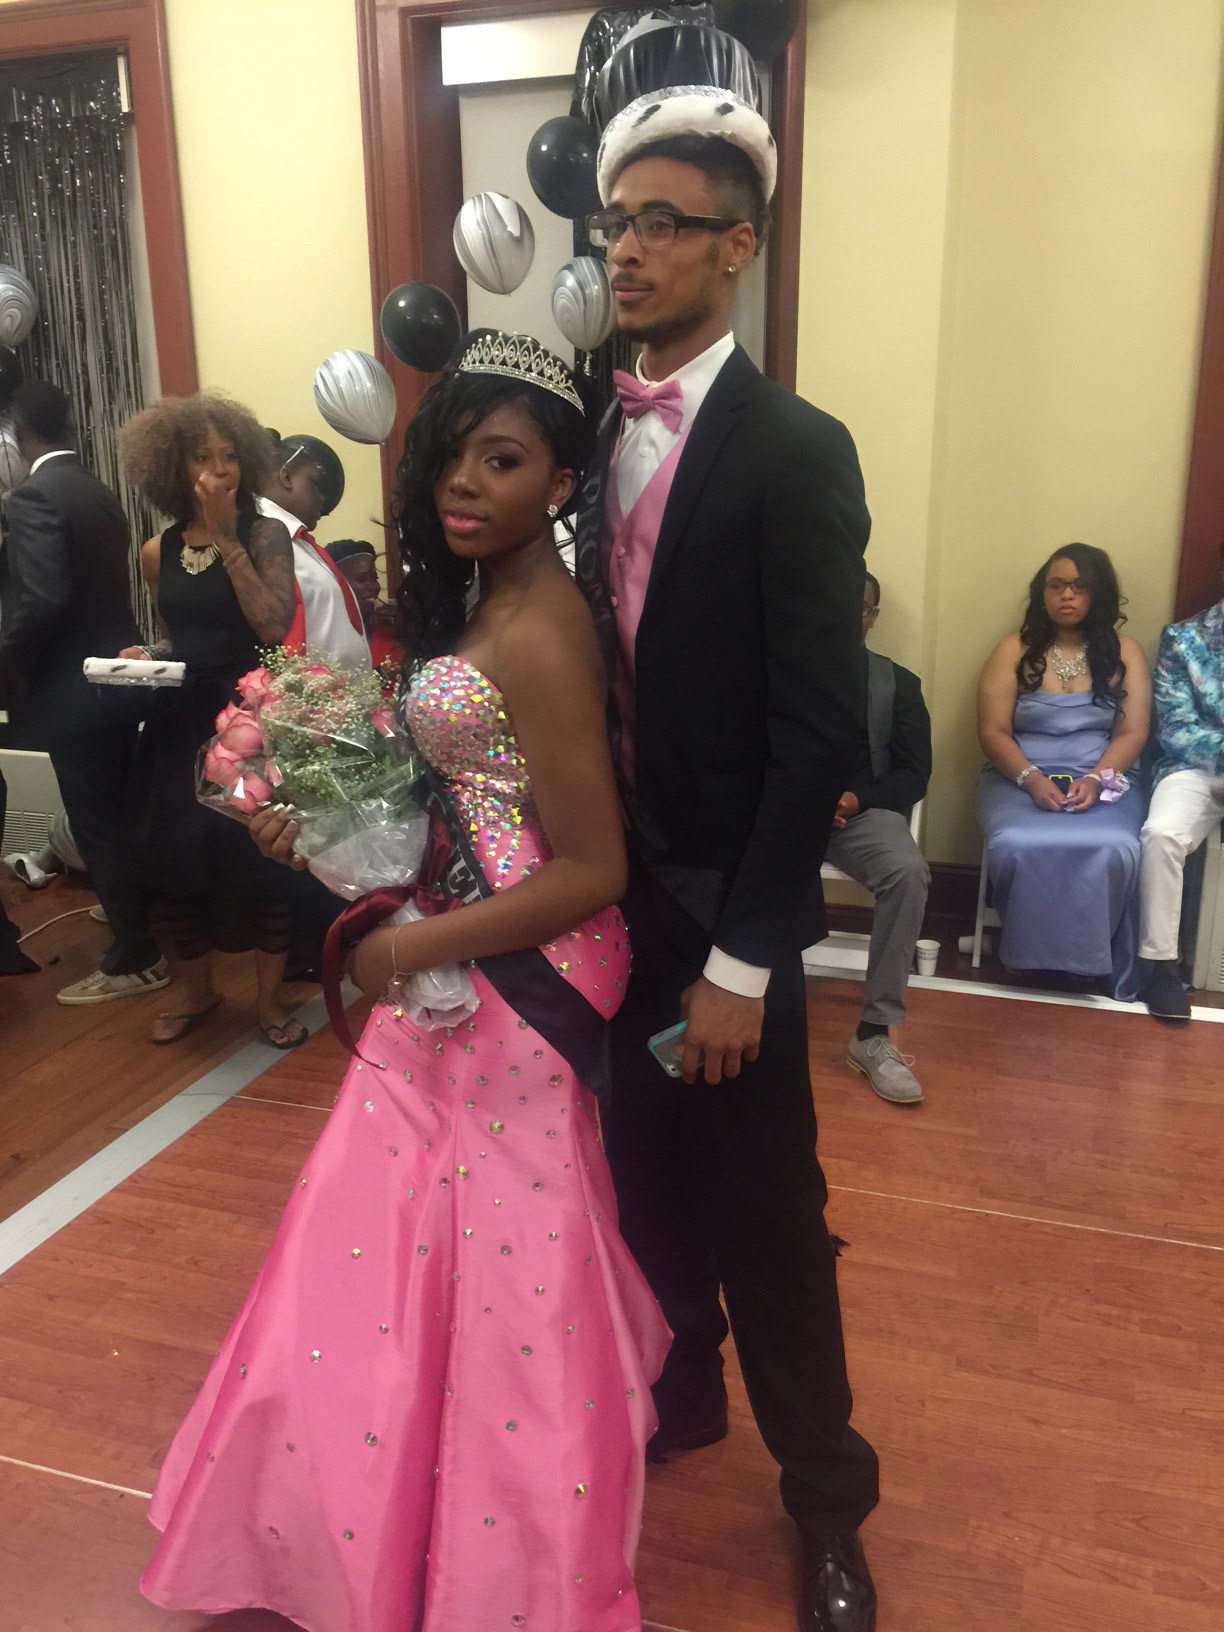 PHOTO: Destyni Tyree was voted prom queen, posing here with a friend. 